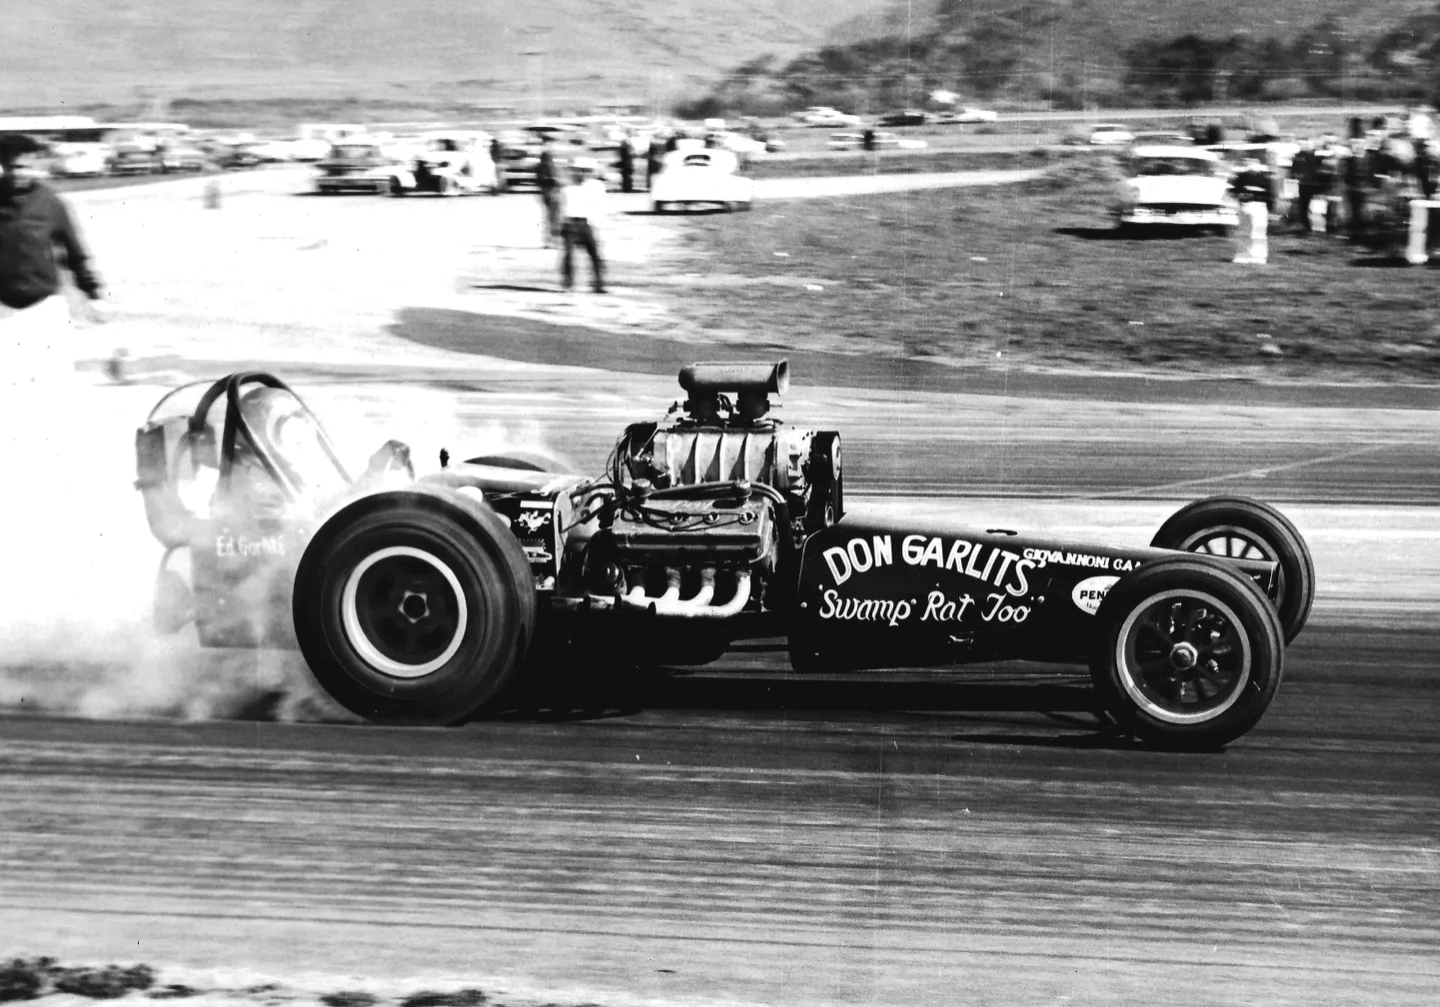 Driven by Ed Garlits, Don’s brother. Because Don was the original Swamp Rat, all cars driven by Ed were known as Swamp Rat Toos. Ed Garlits was very successful in the gas ranks. He was the Florida State Champion in 1957, 1958, 1959, 1960, and 1961. Ed would win the AHRA Gas Championship in 1961.